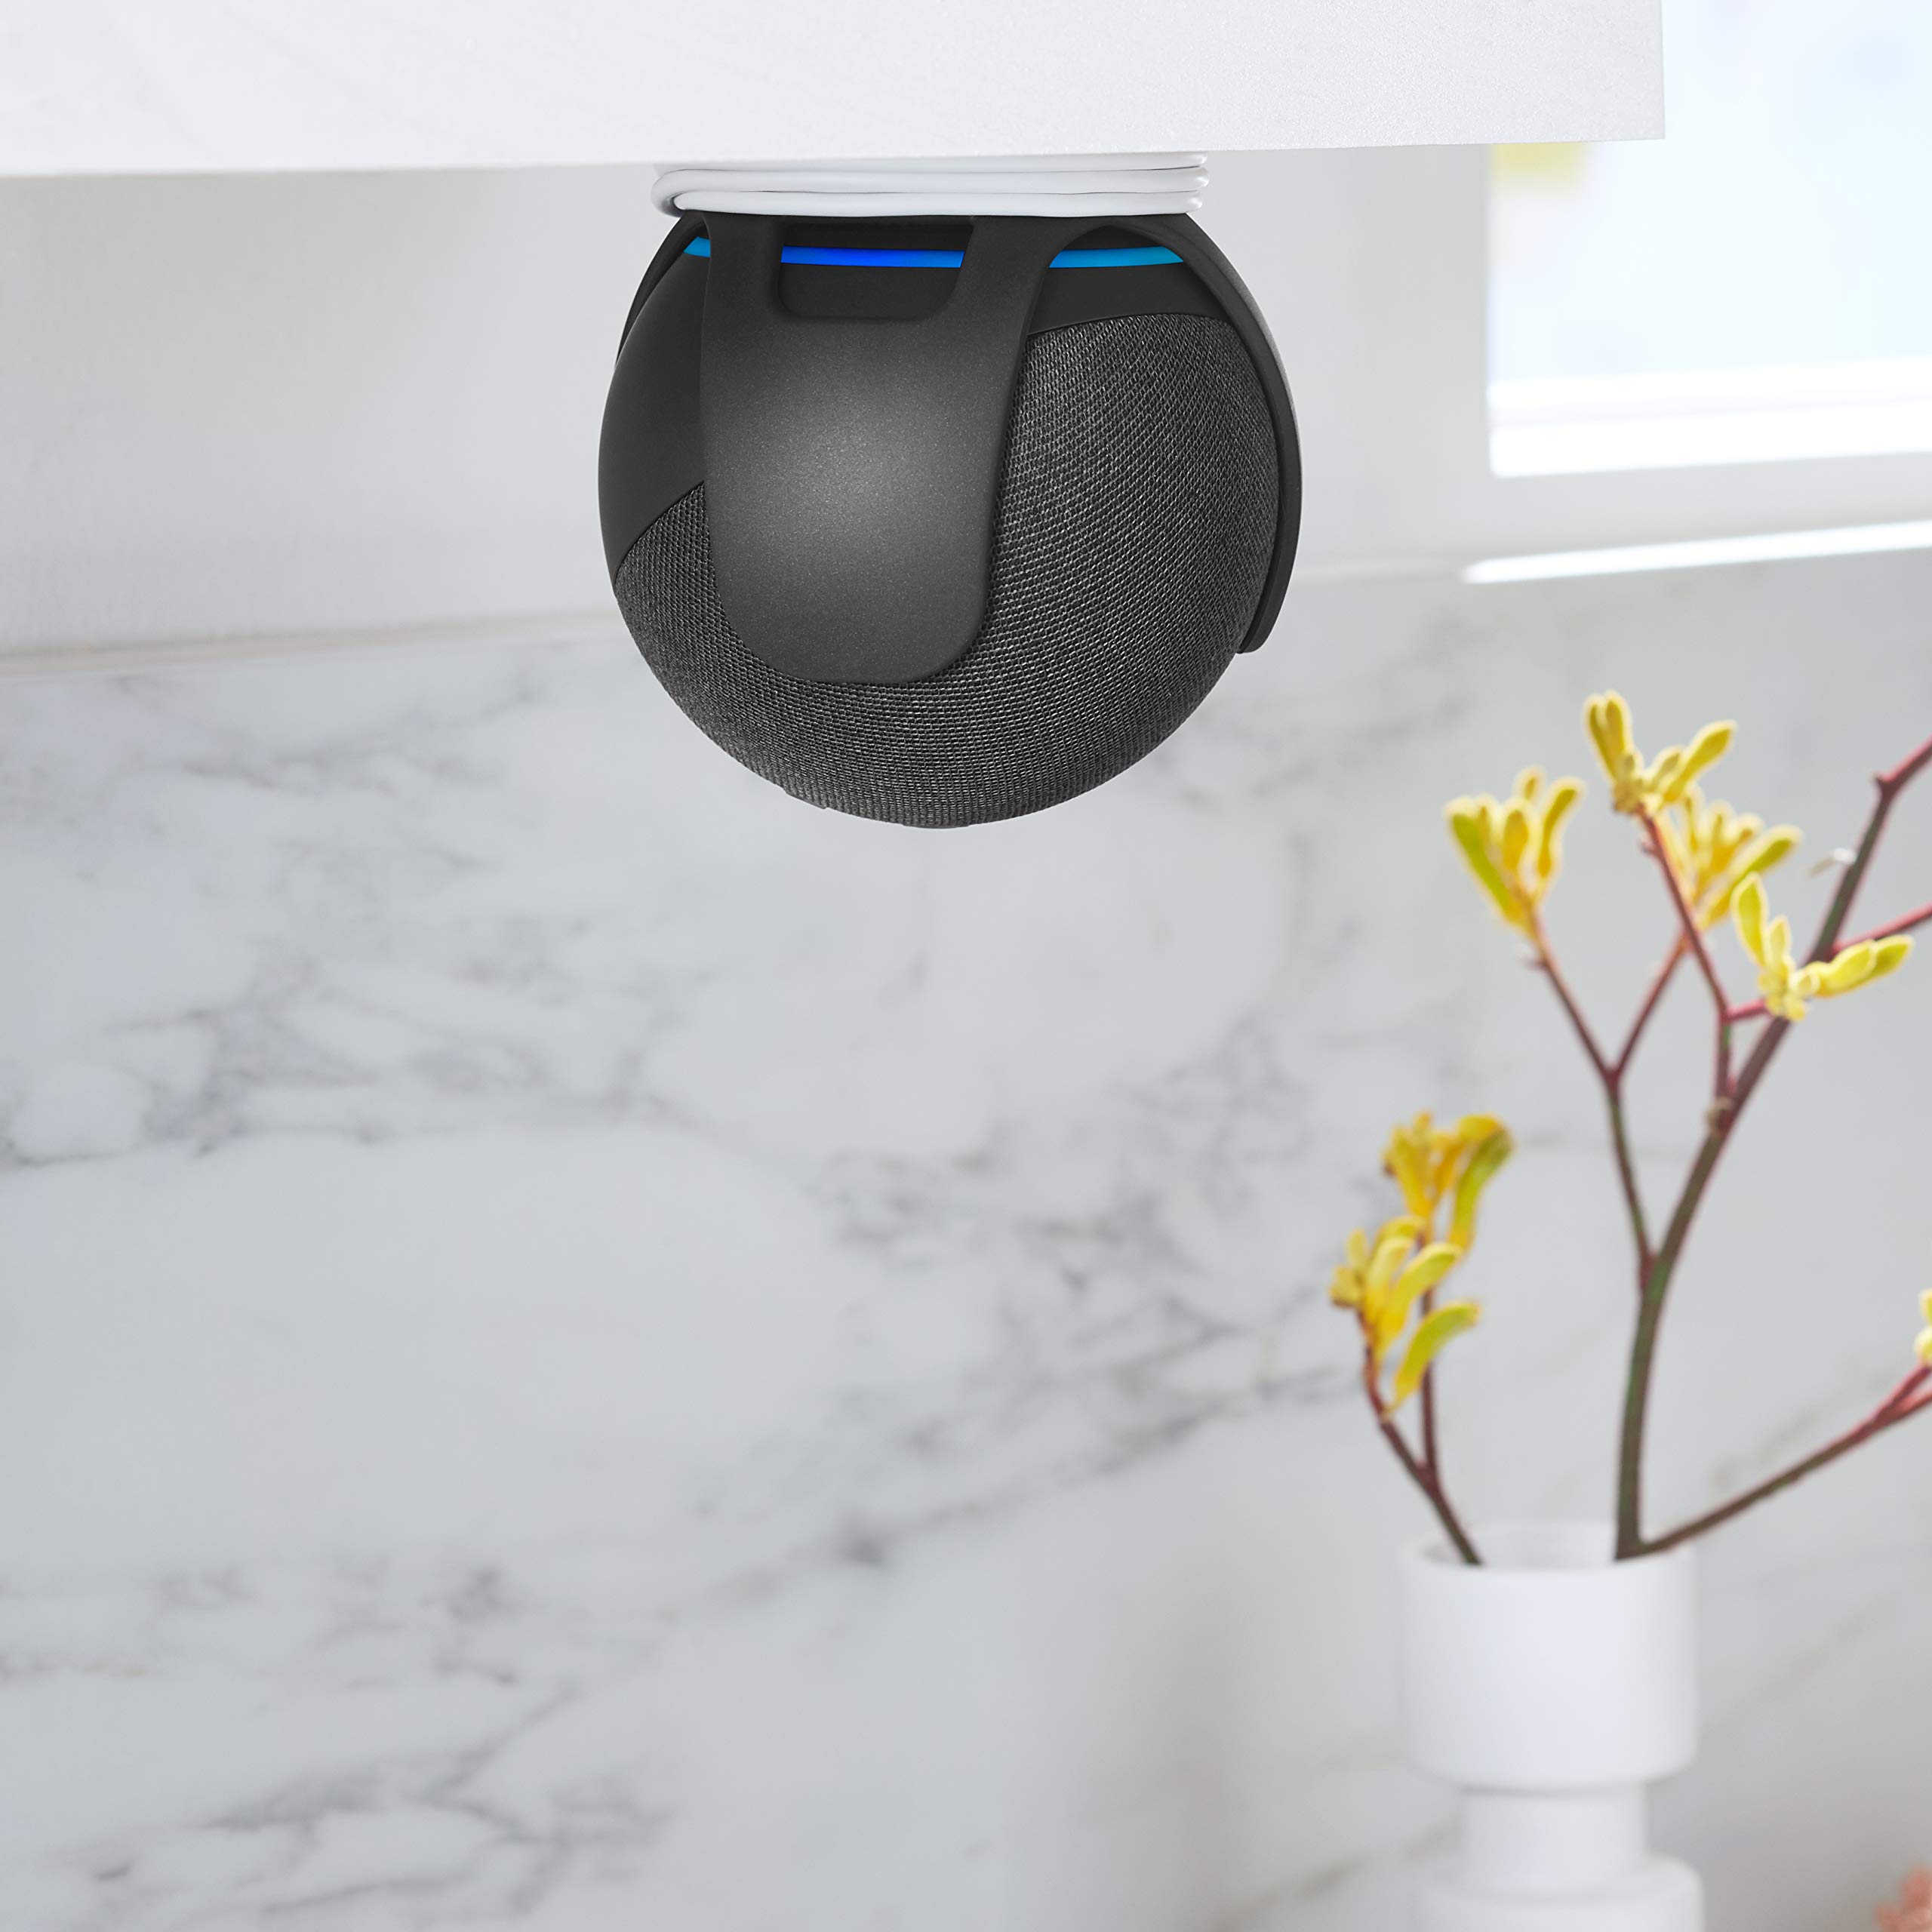 Made For Amazon Wall Mount, Black, for Echo Dot (4th generation)